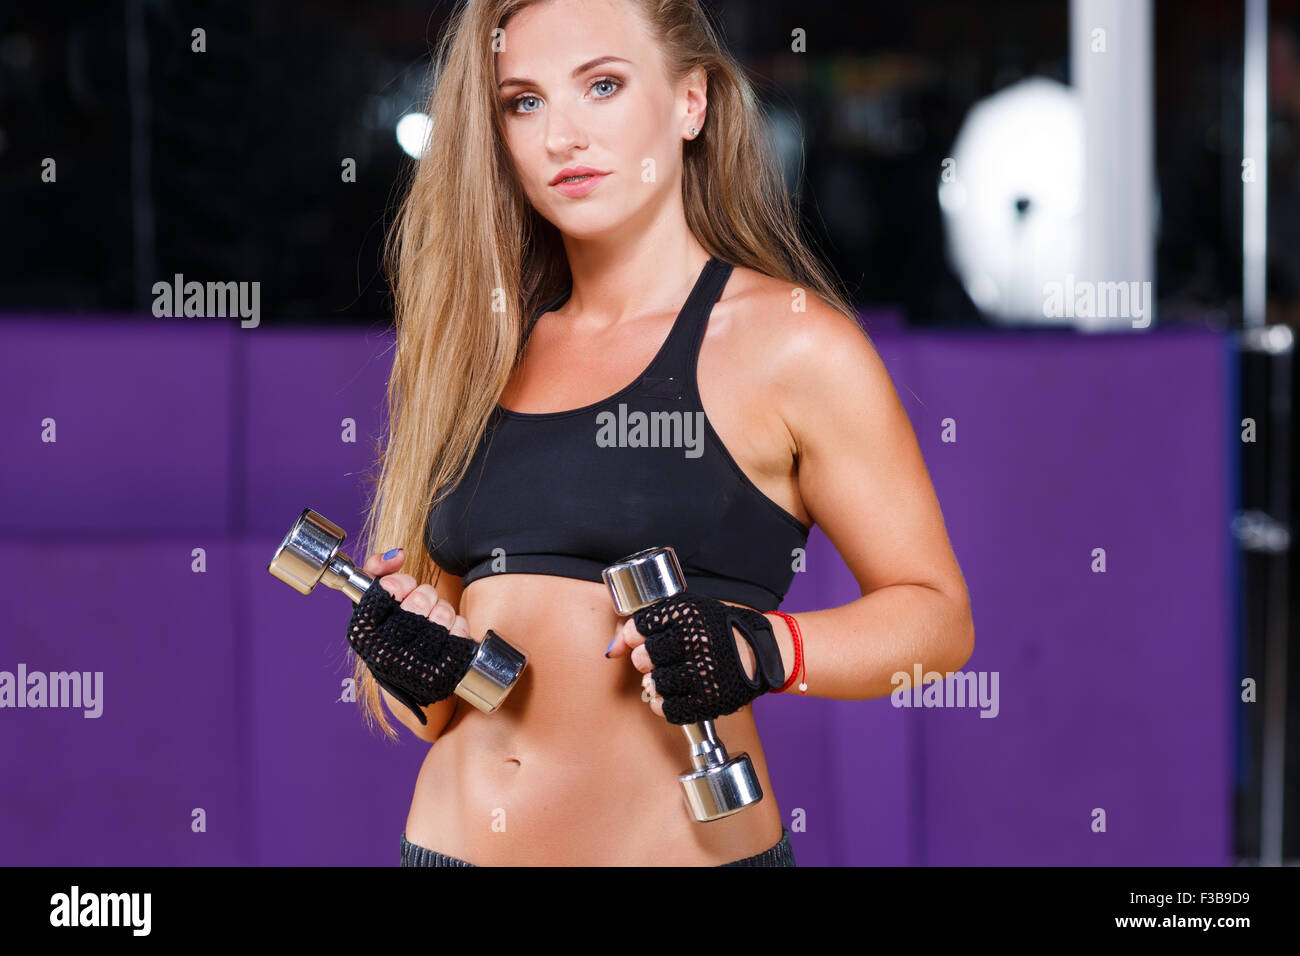 Strong young woman, with long hair, wearing in black top and breeches, holding dumbbells and looking at camera, on the sport equ Stock Photo